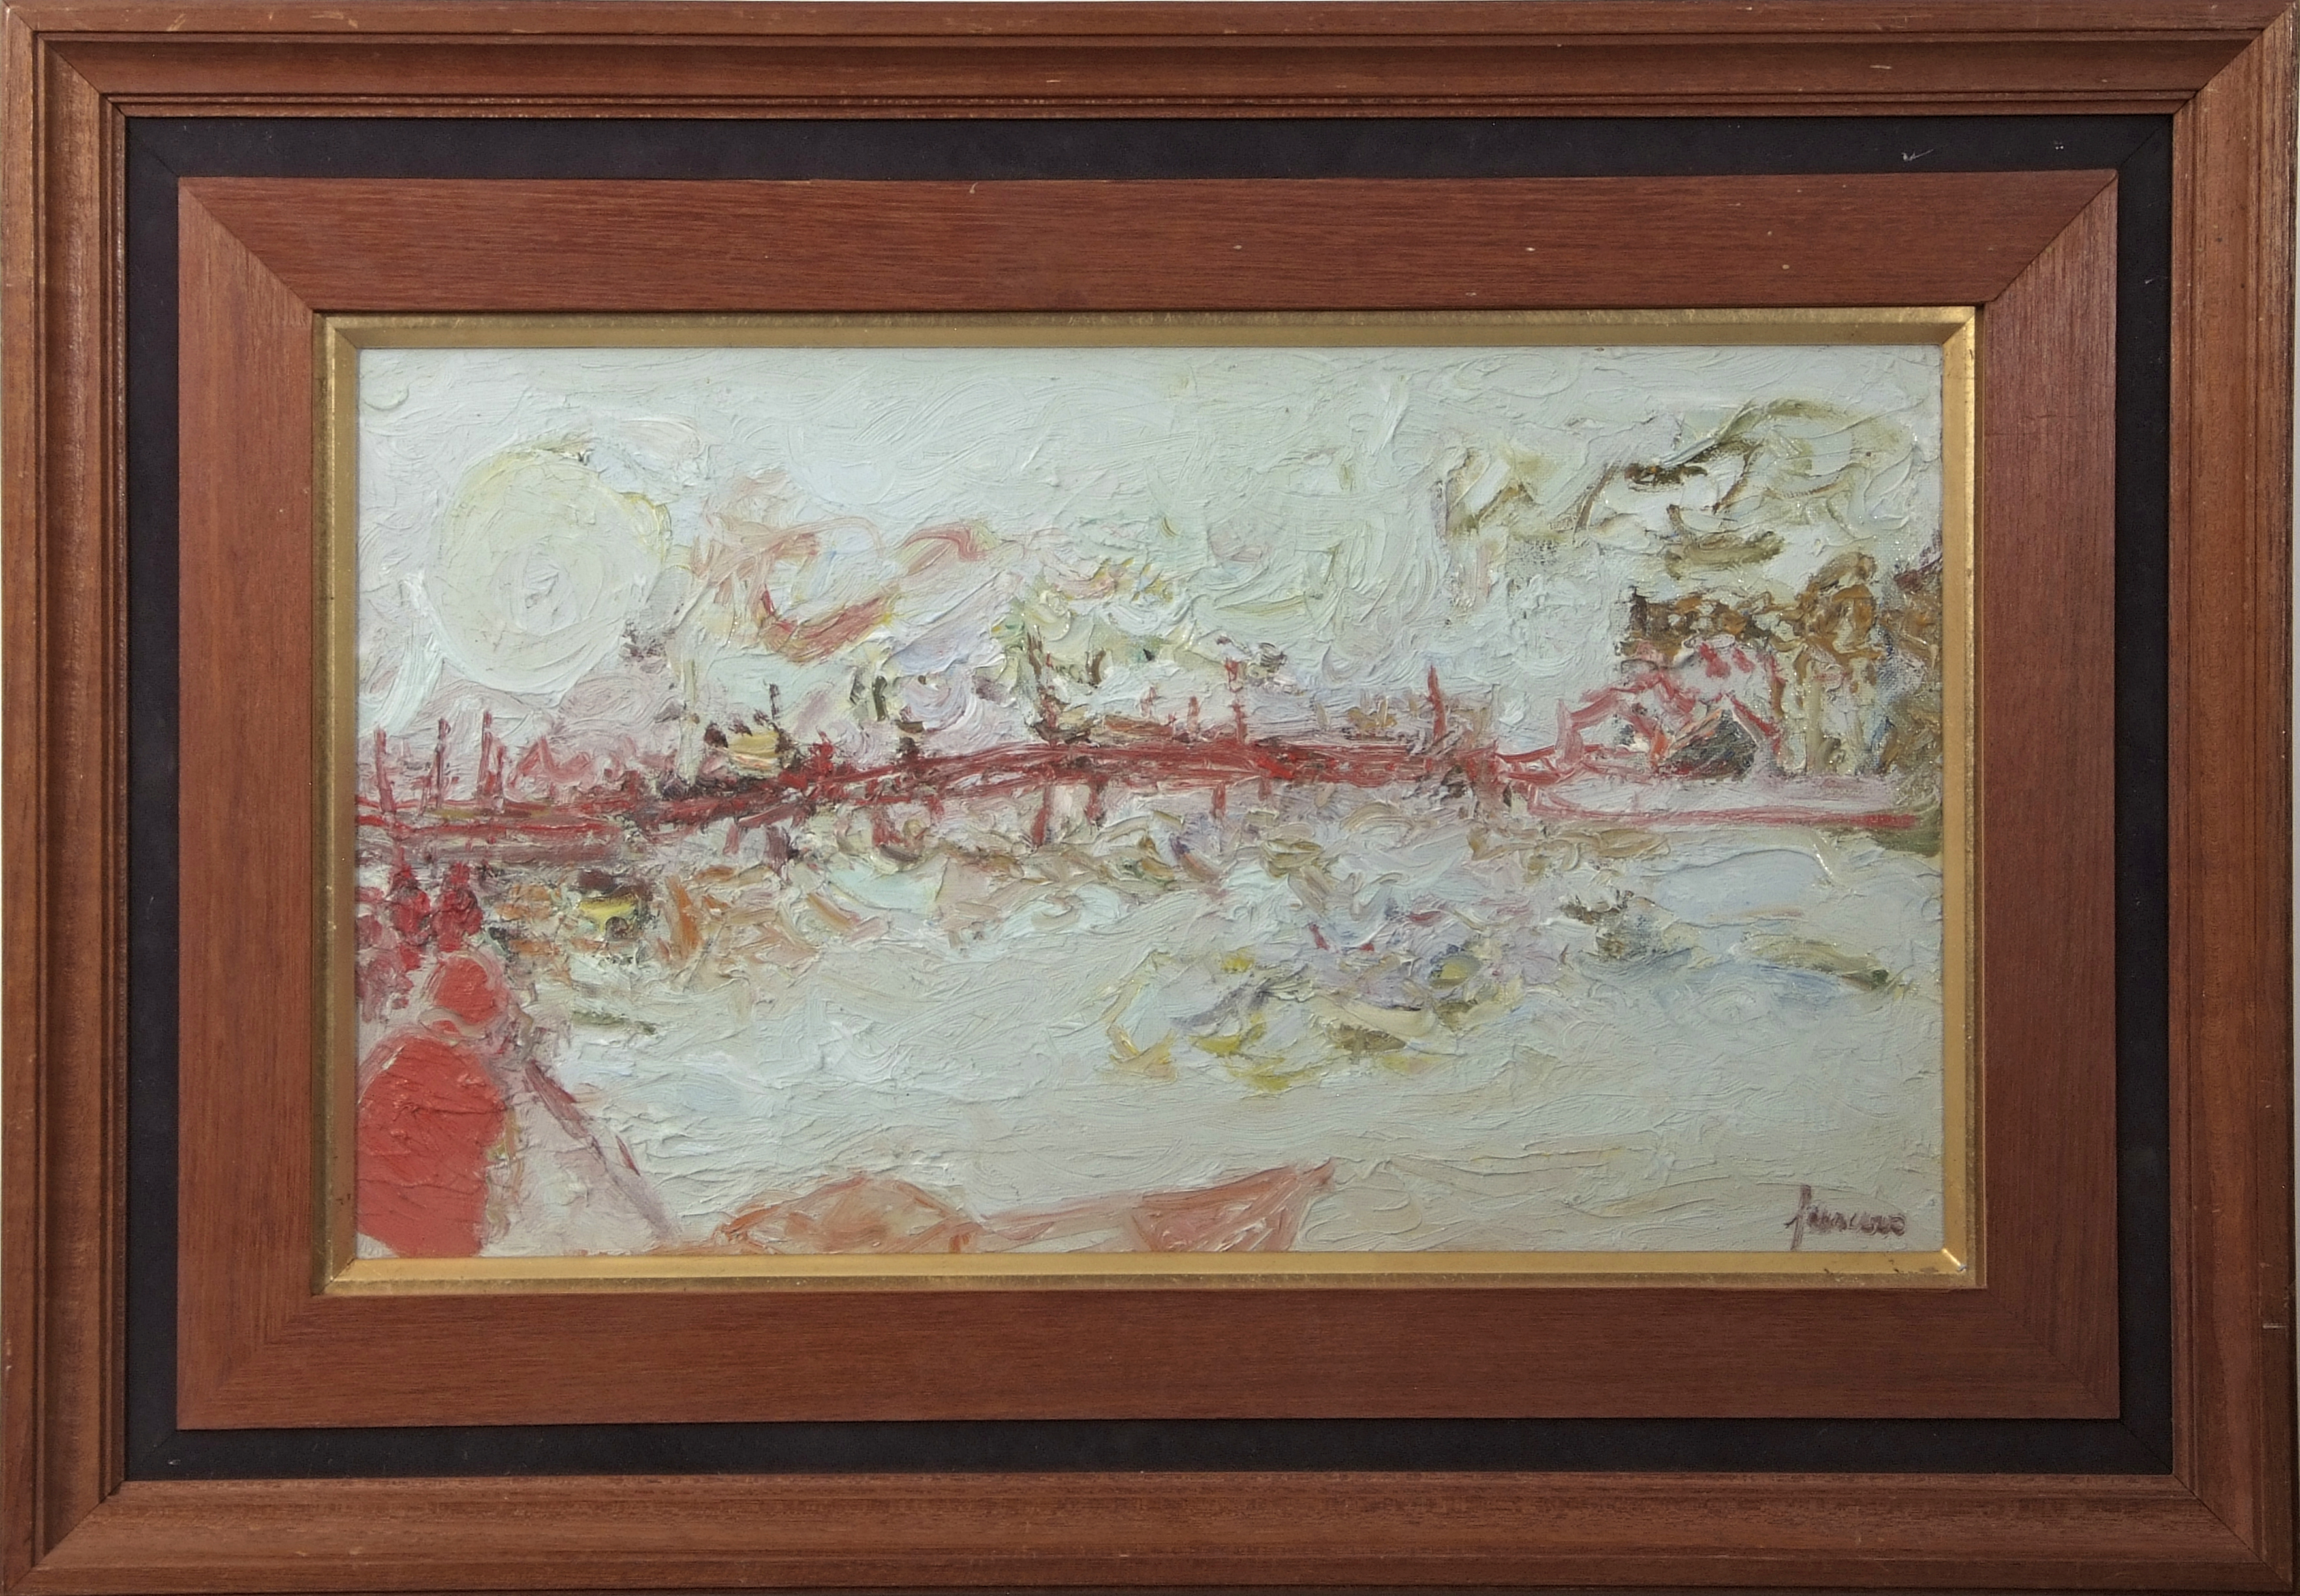 •AR Jean Fusaro (born 1925), "Le Pont Rouge 1970", oil on canvas, signed lower right, 27 x 46cm.